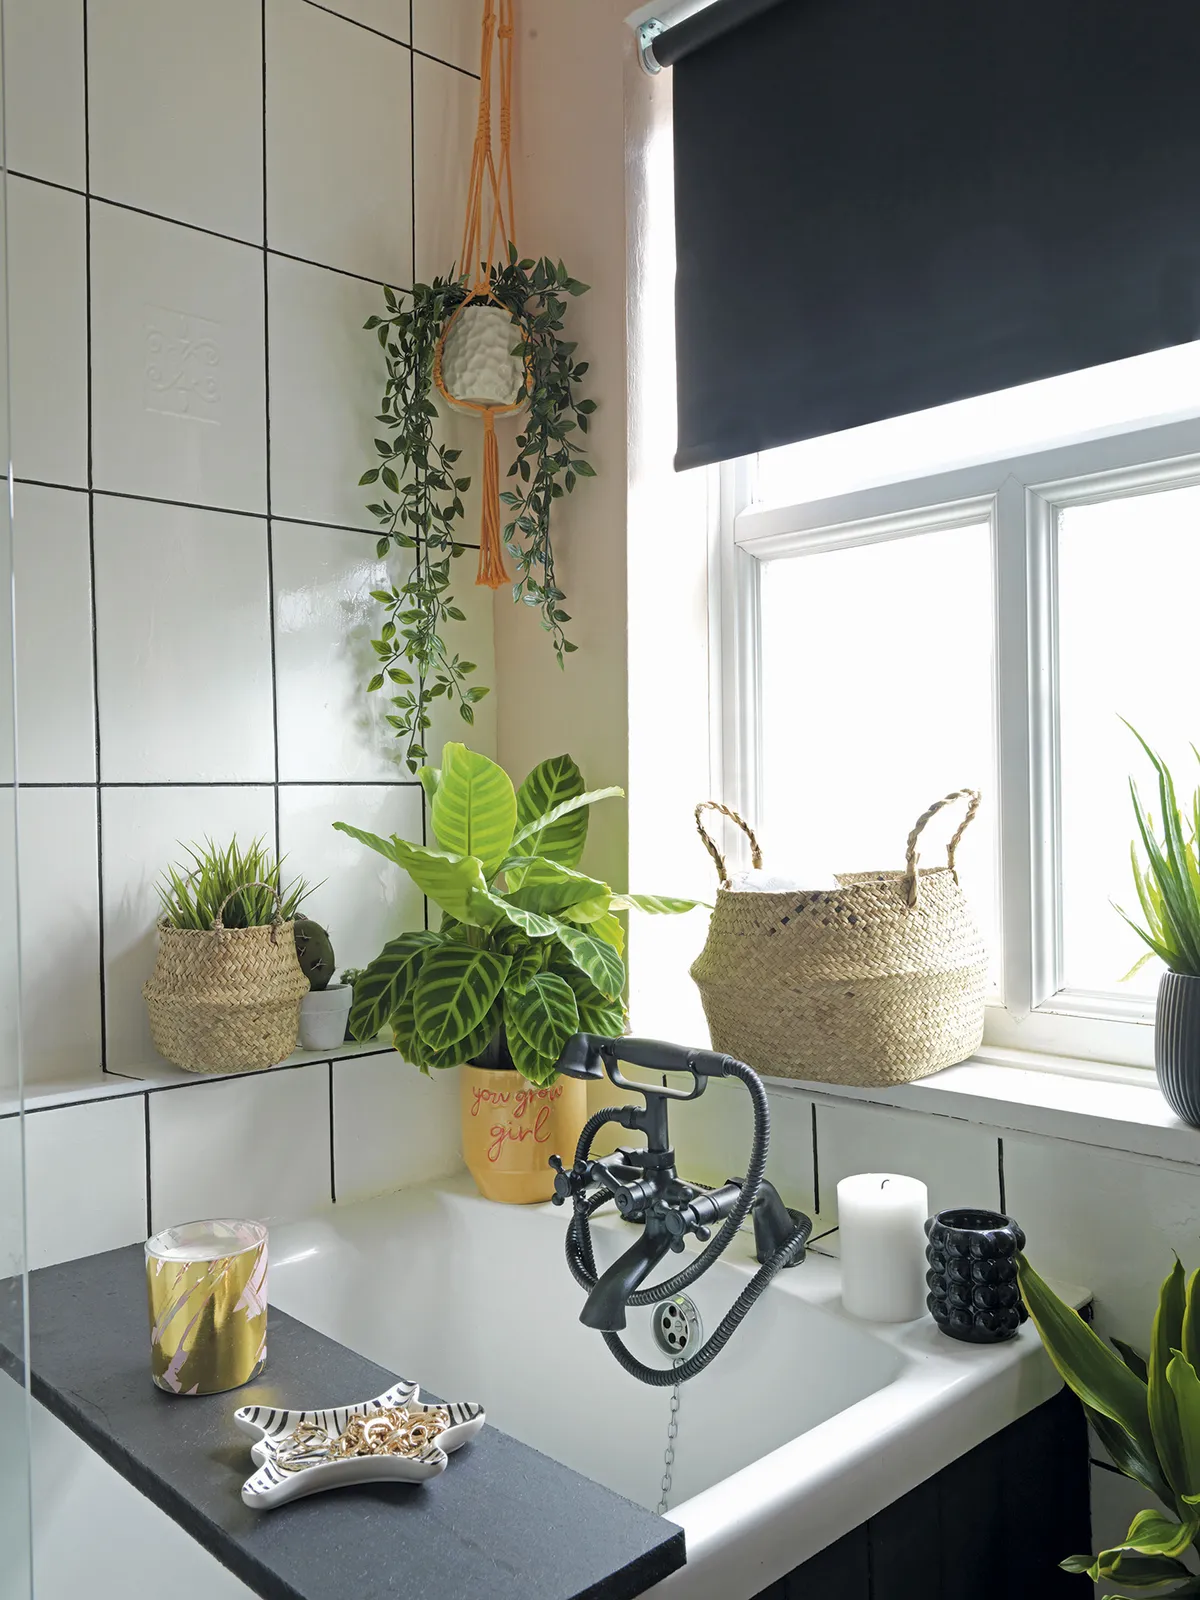 Handy ledge space around the bath provides a place for plants or to keep toiletries within arm’s reach